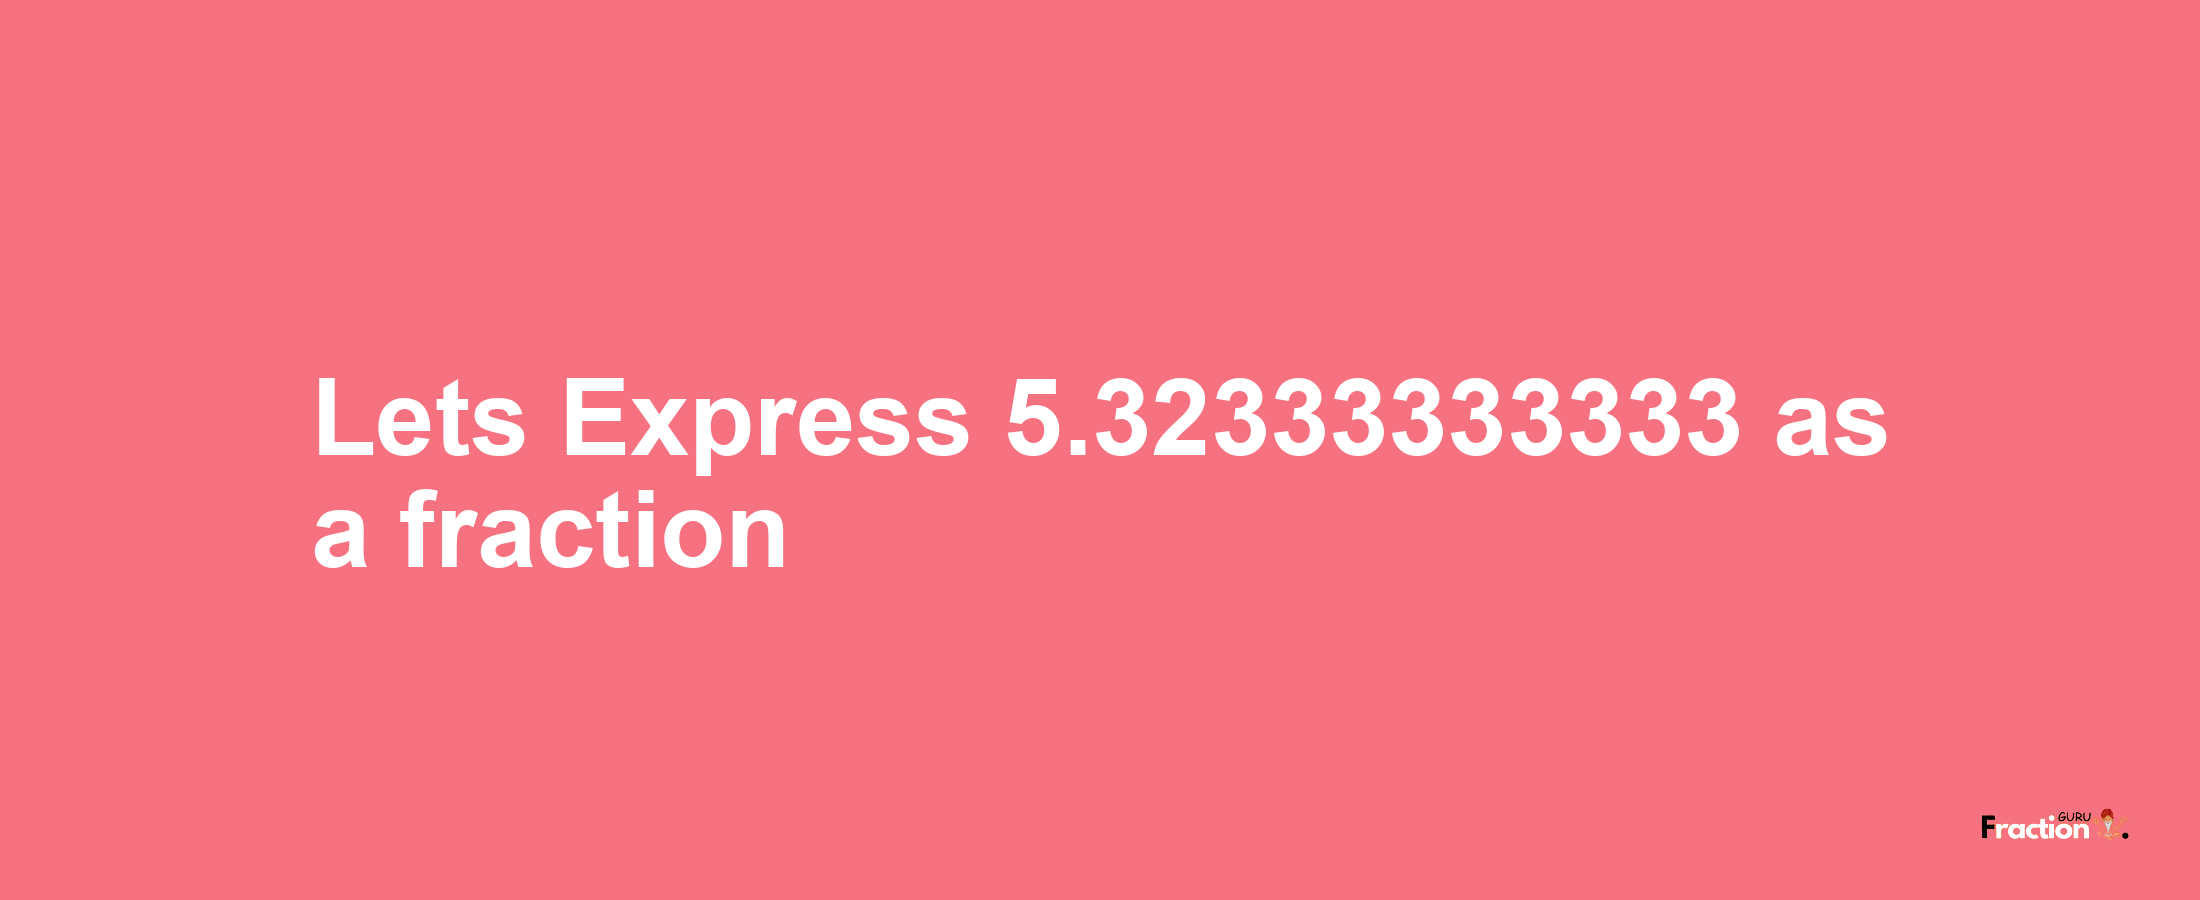 Lets Express 5.32333333333 as afraction